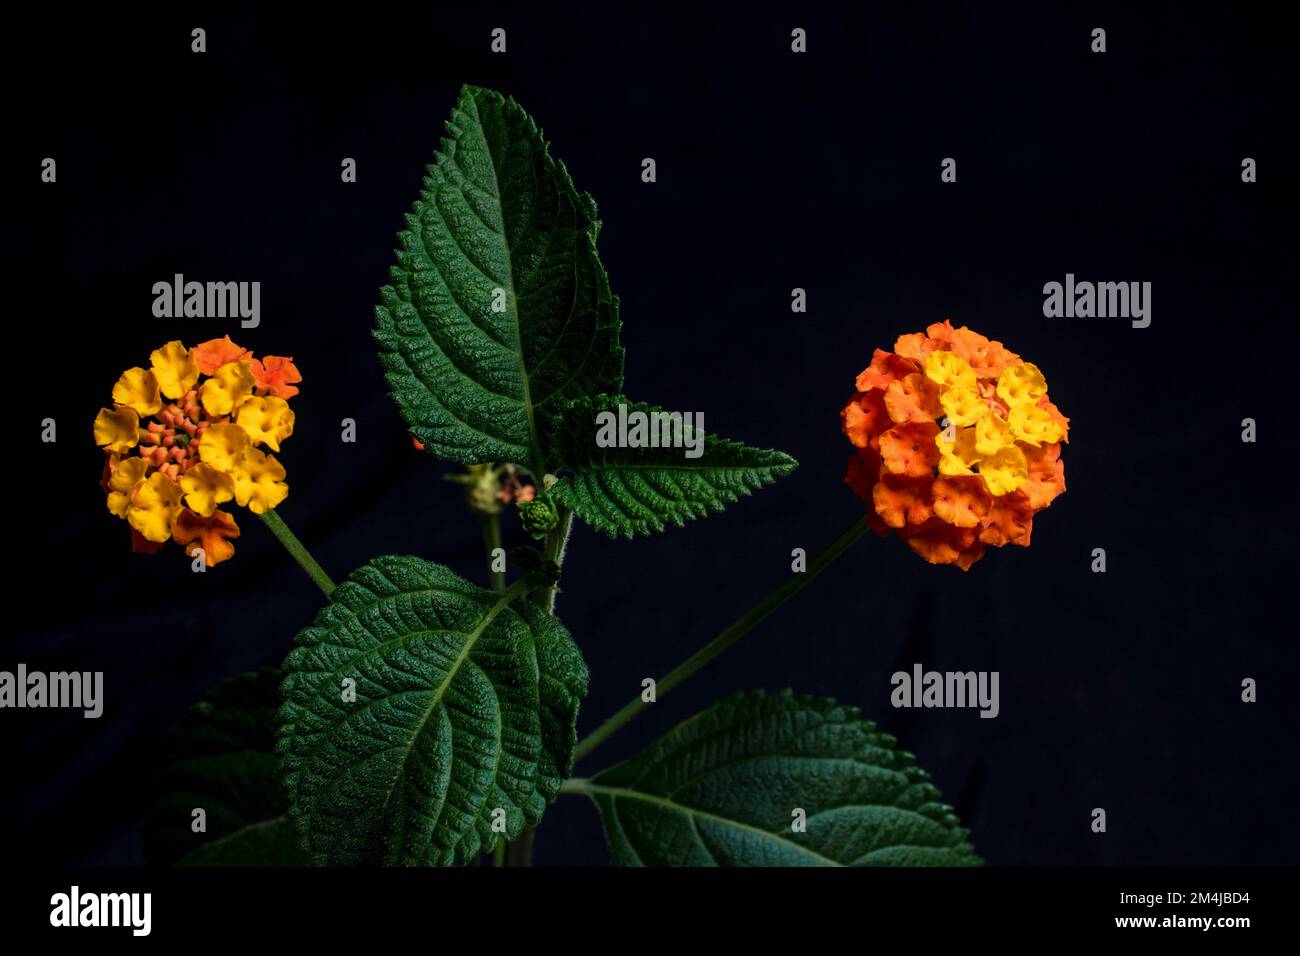 Lantana camara, commonly called lantana, is a shrub in the genus Lantana. It is native to Central and South America. It is included in the list of 100 Stock Photo